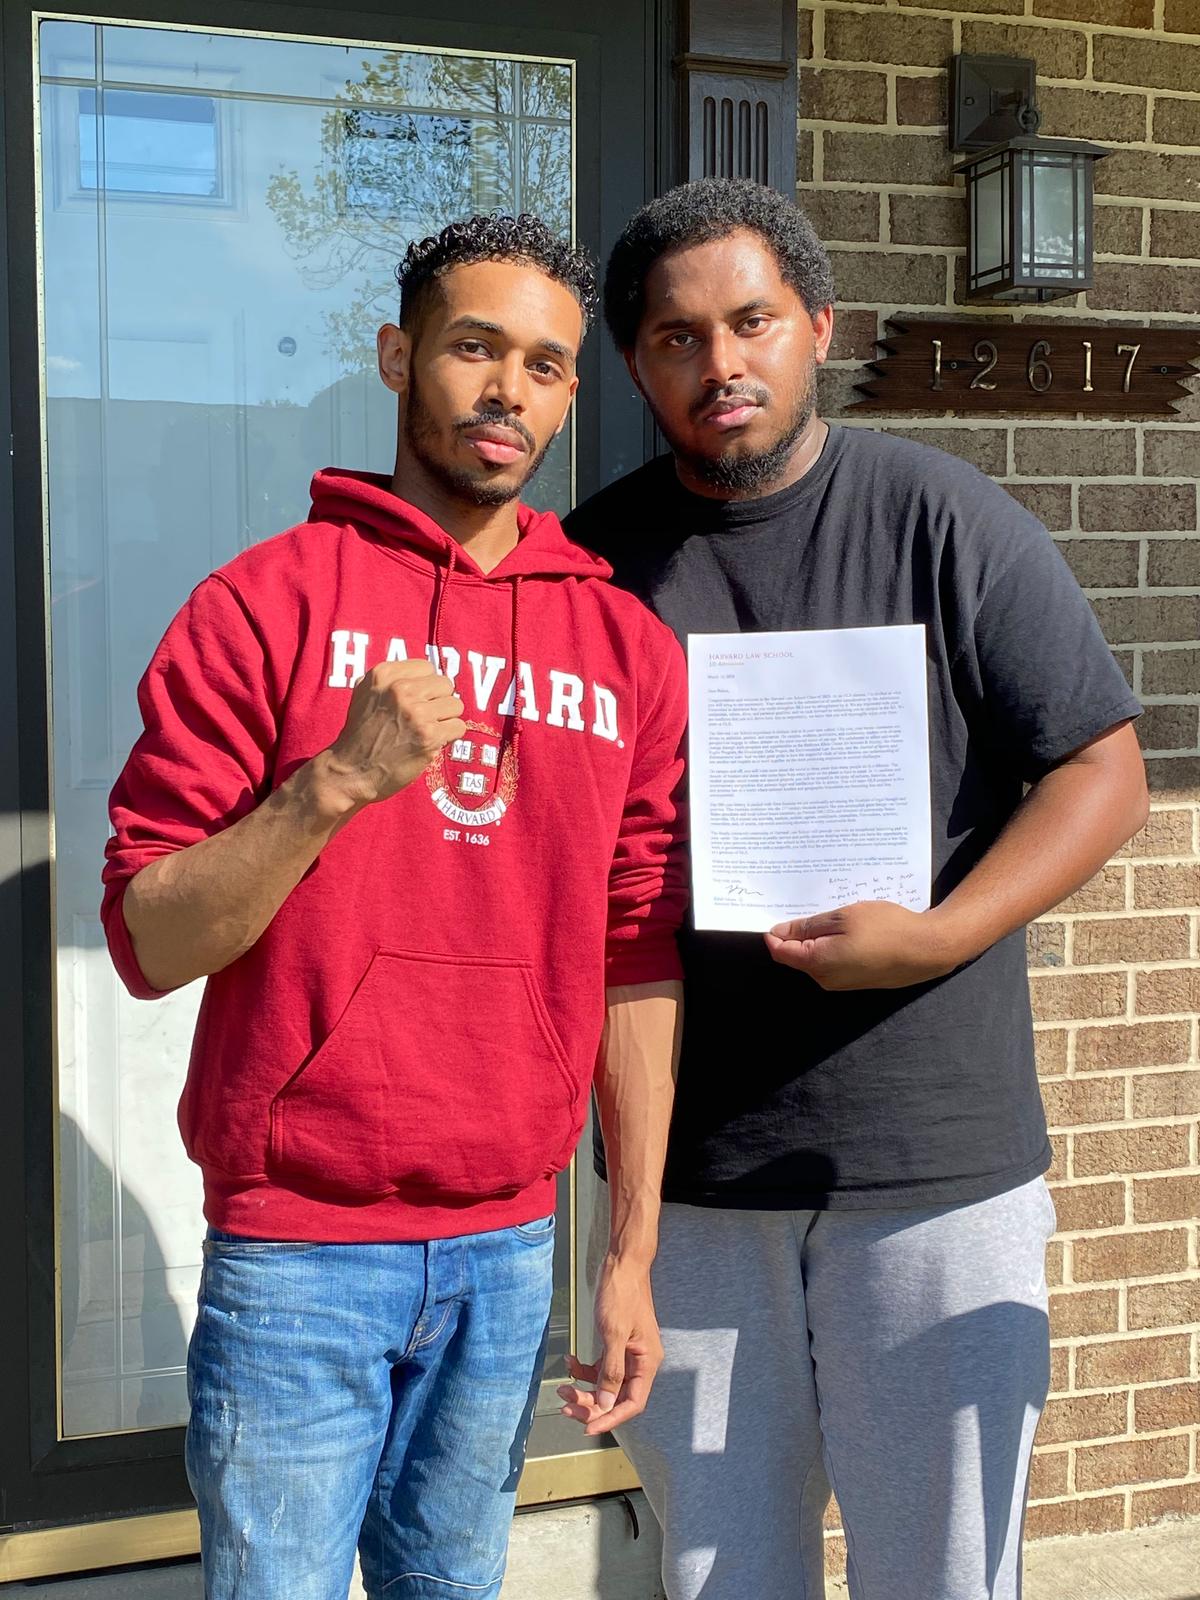 Rehan Staton with his older brother, Reggie Staton, holding his acceptance letter to Harvard Law School. (Courtesy of Rehan Staton)